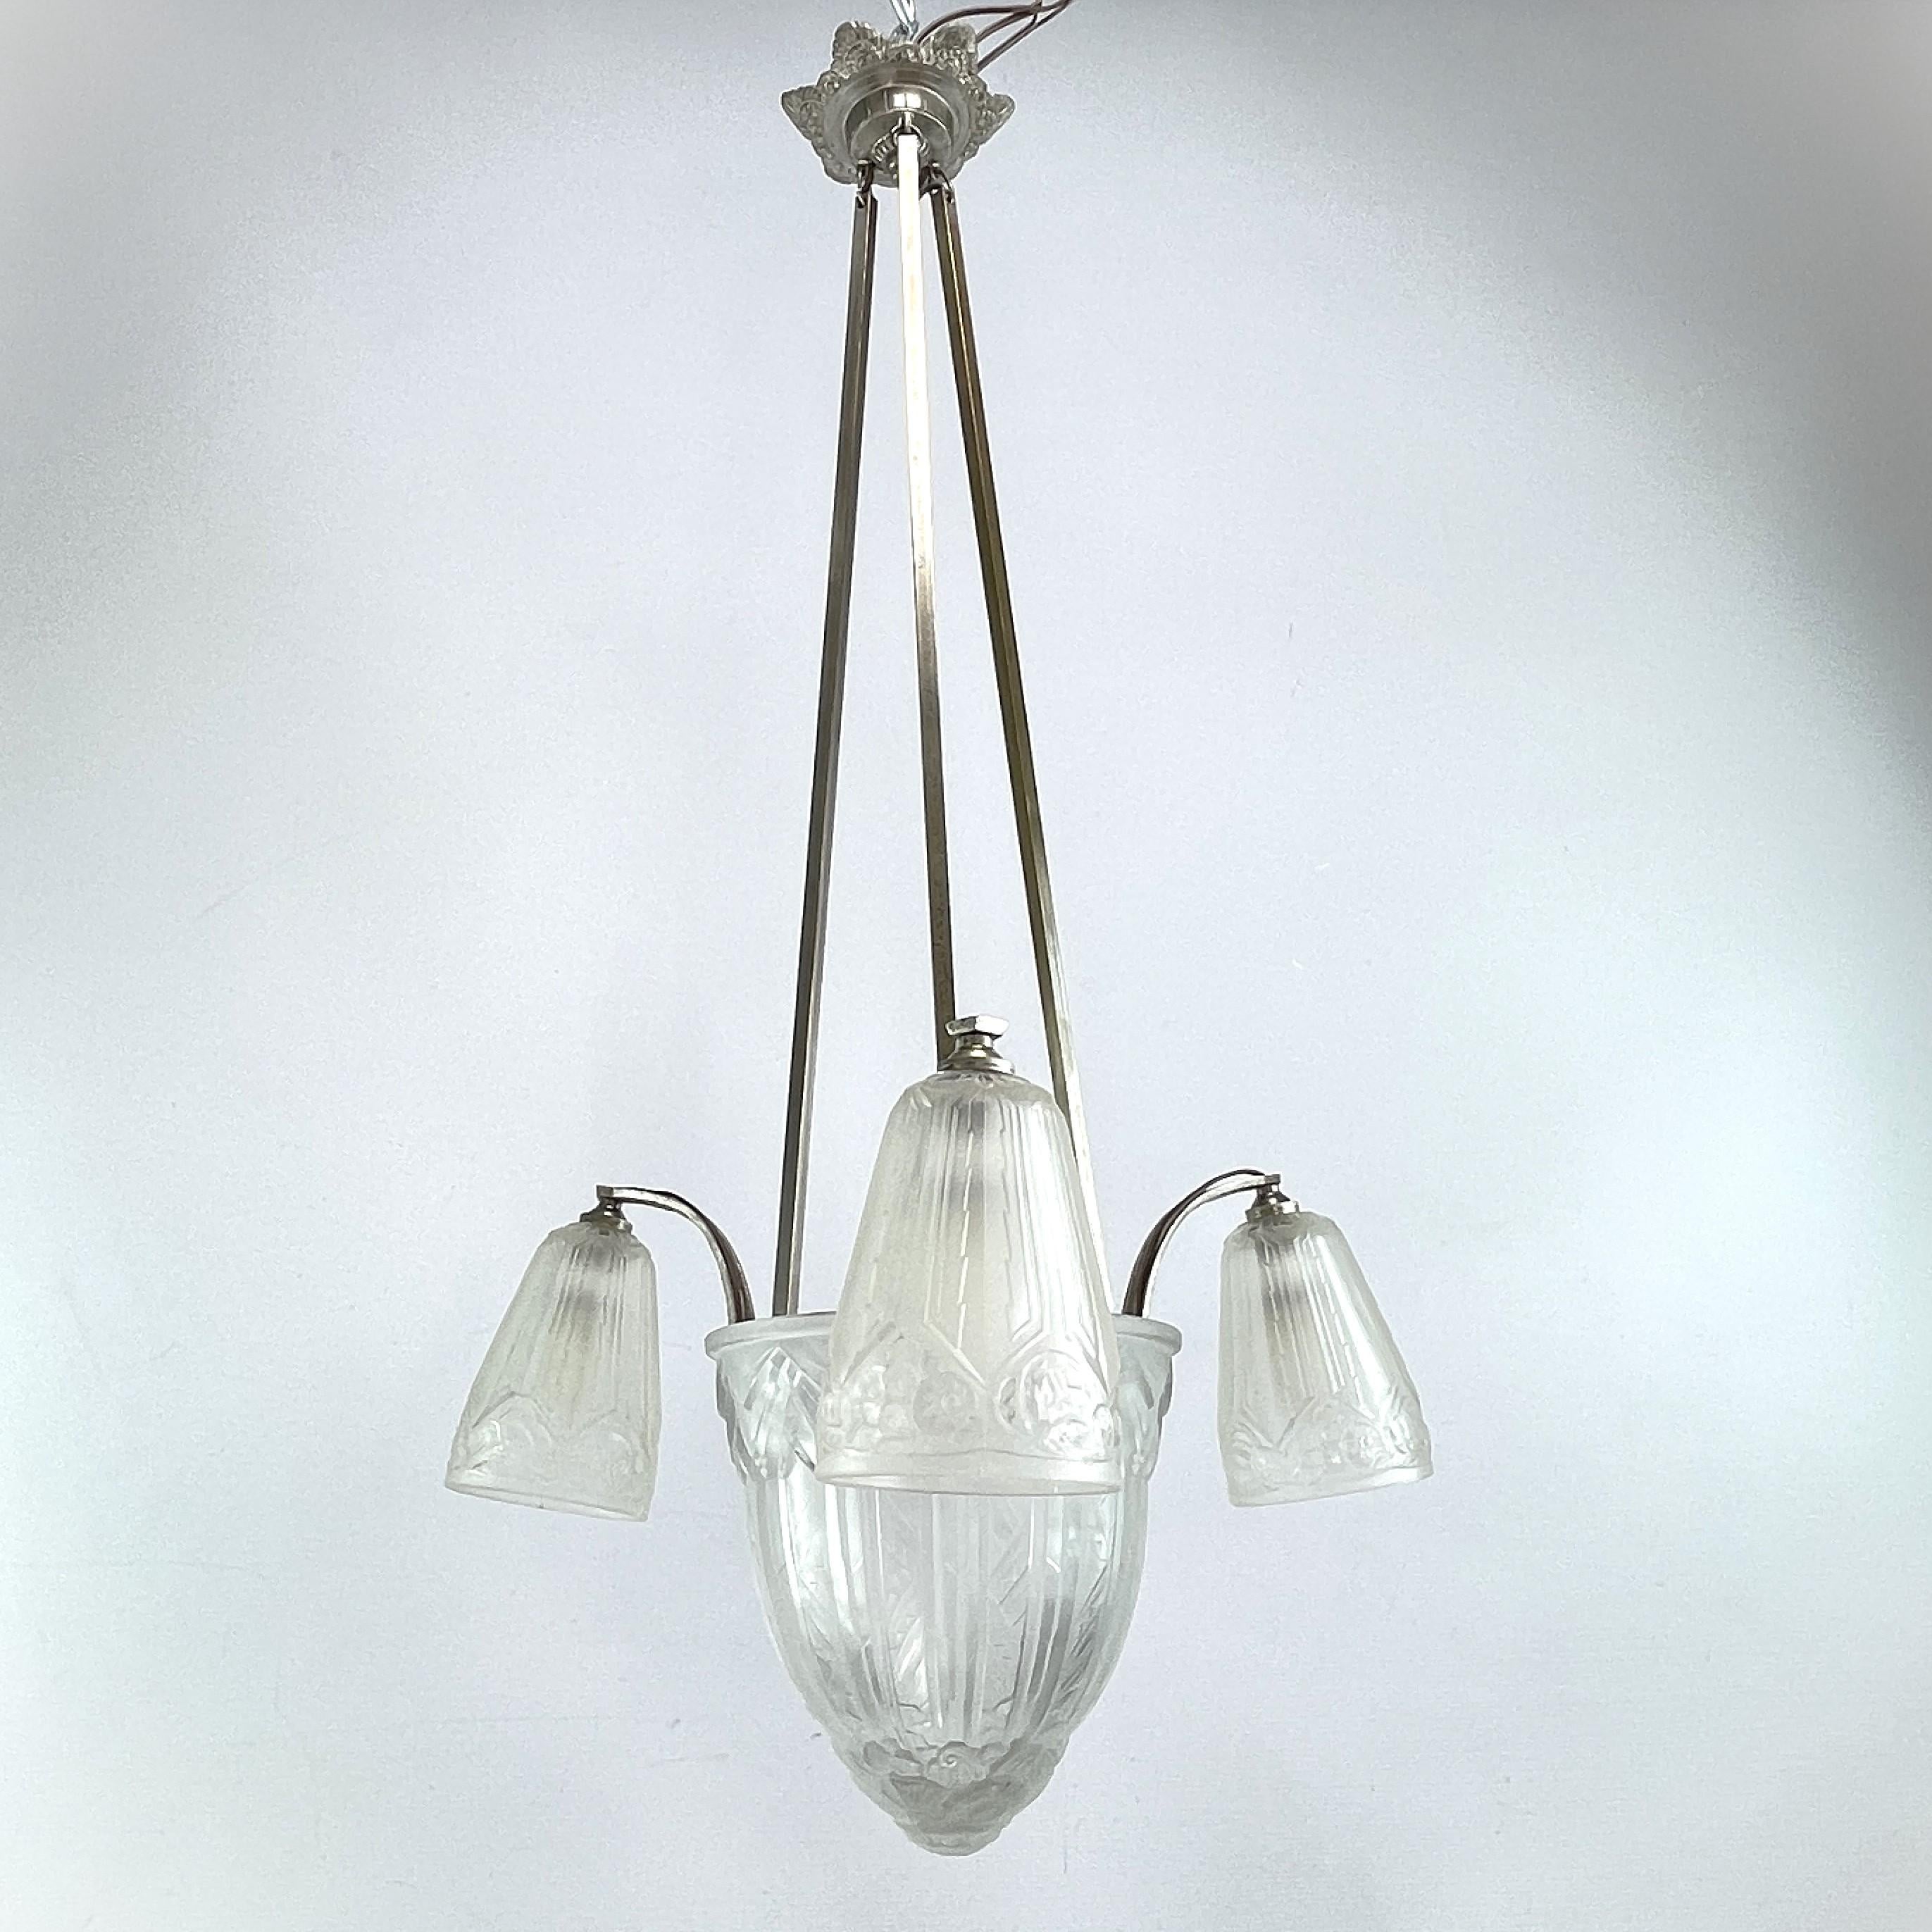 French Art Deco Chandelier Hanging Lamp by Maynadier, 1930s For Sale